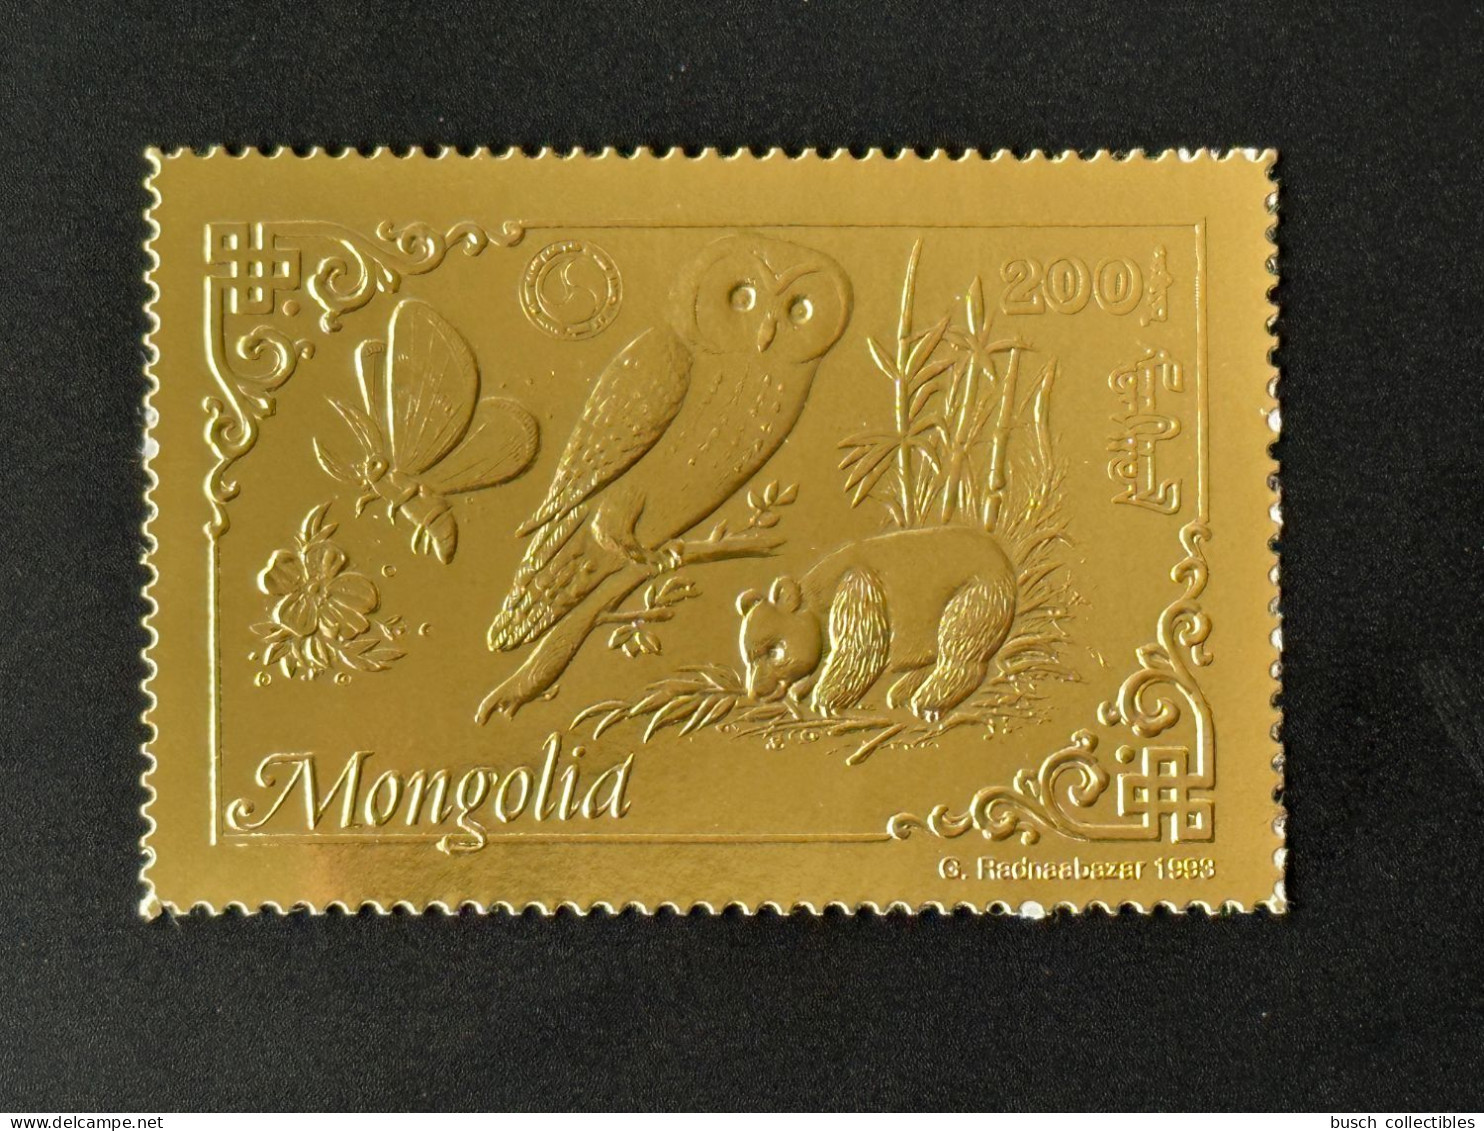 Mongolie Mongolia 1993 Mi. 2475 A Or Gold Rotary Lions Butterfly Owl Eule Panda Papillon Schmetterling Chouette - Rotary Club